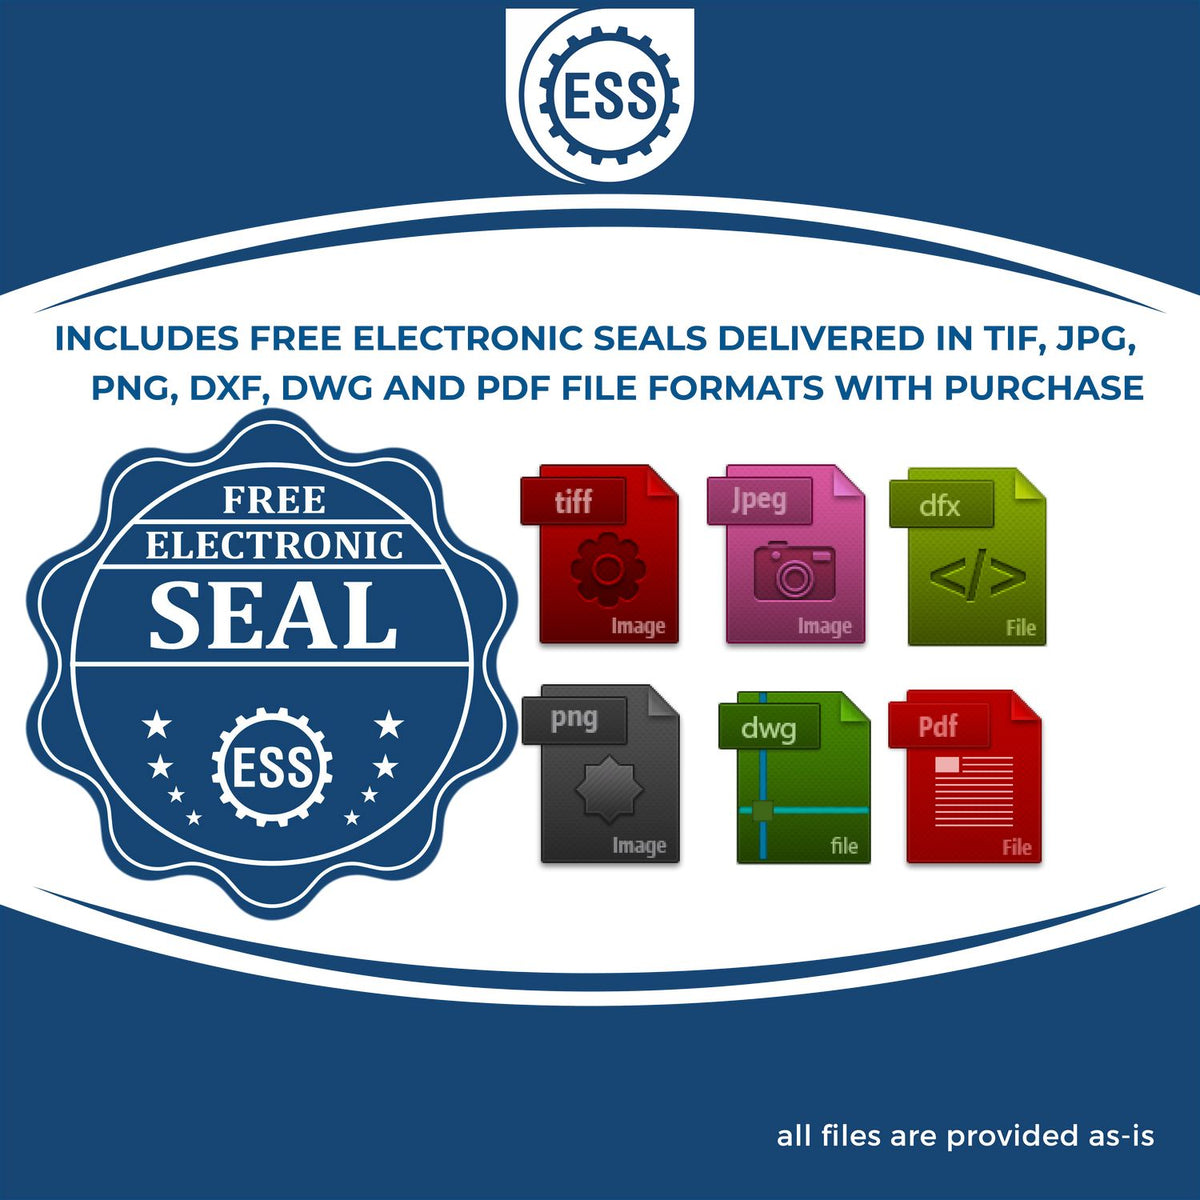 An infographic for the free electronic seal for the Heavy-Duty Maryland Rectangular Notary Stamp illustrating the different file type icons such as DXF, DWG, TIF, JPG and PNG.